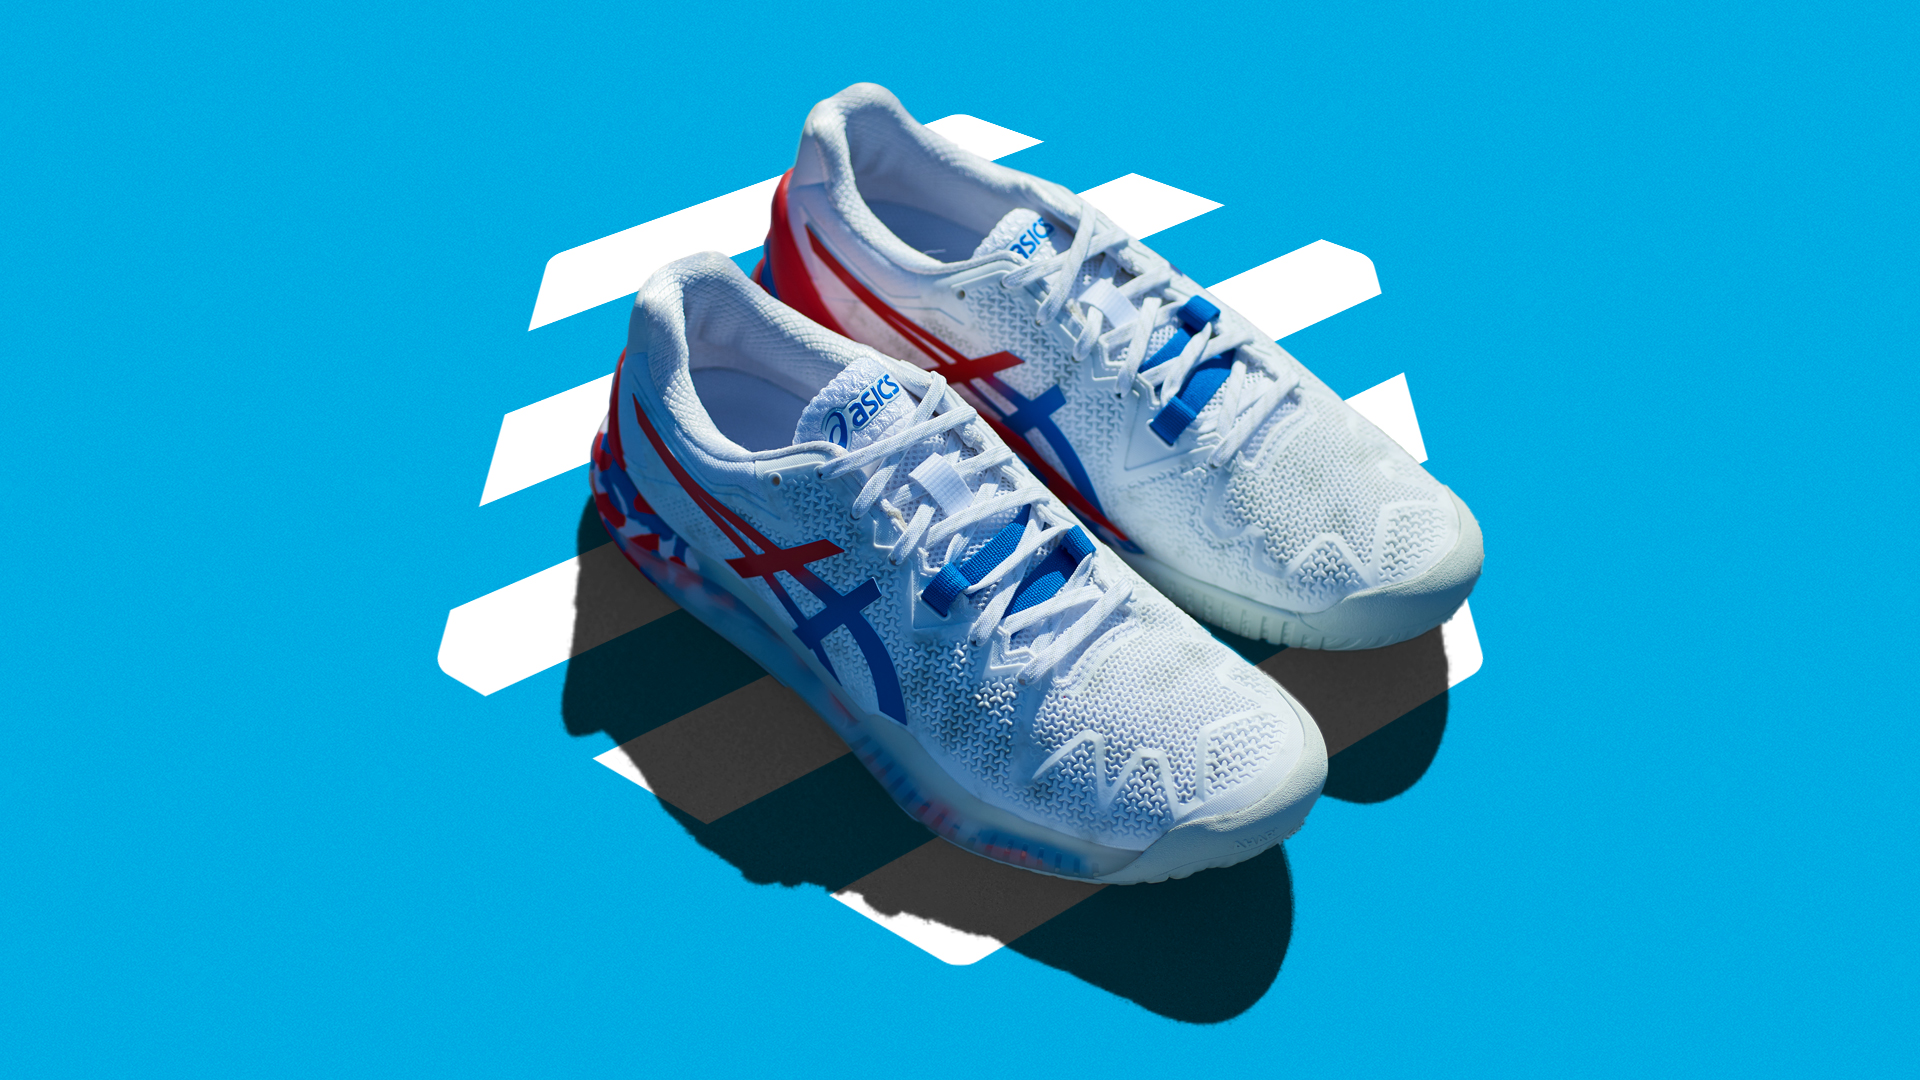 Asics Tennis Trainers Developed 